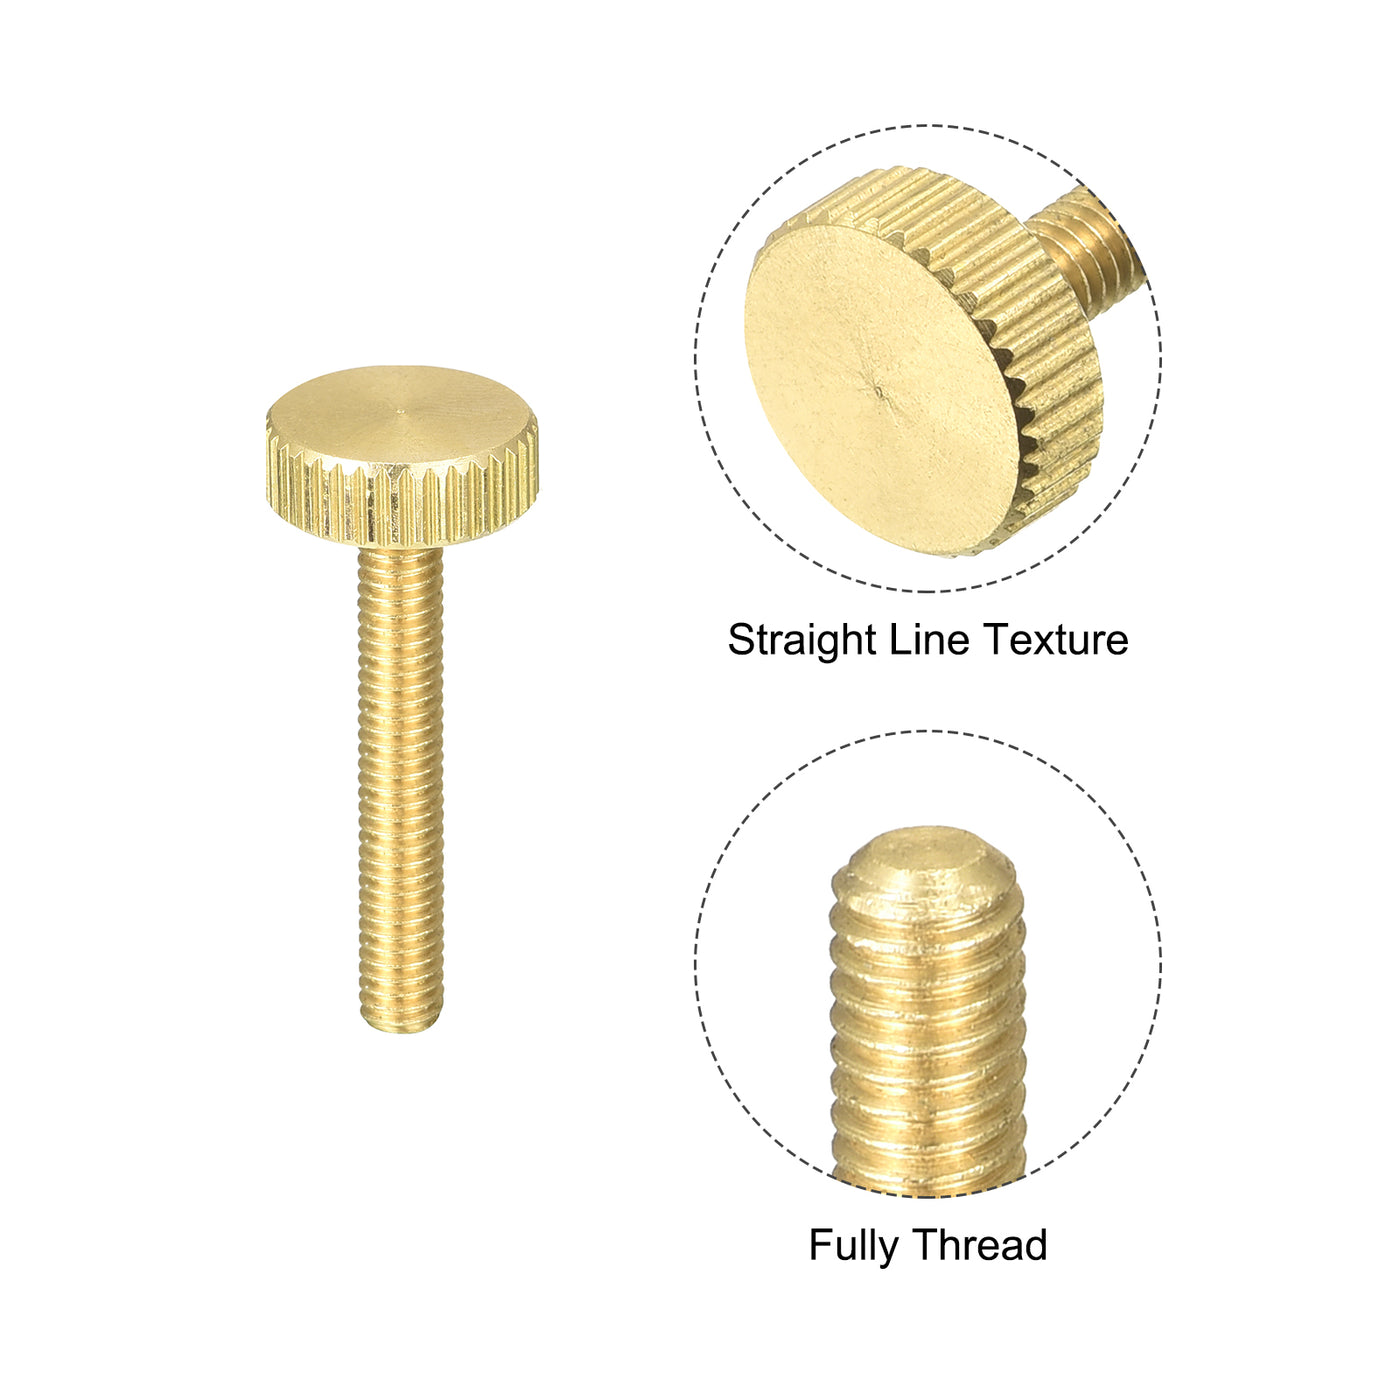 uxcell Uxcell Knurled Thumb Screws, M4x25mm Flat Brass Bolts 12mm Dia.Grip Knobs Fasteners for PC, Electronic, Mechanical 2Pcs